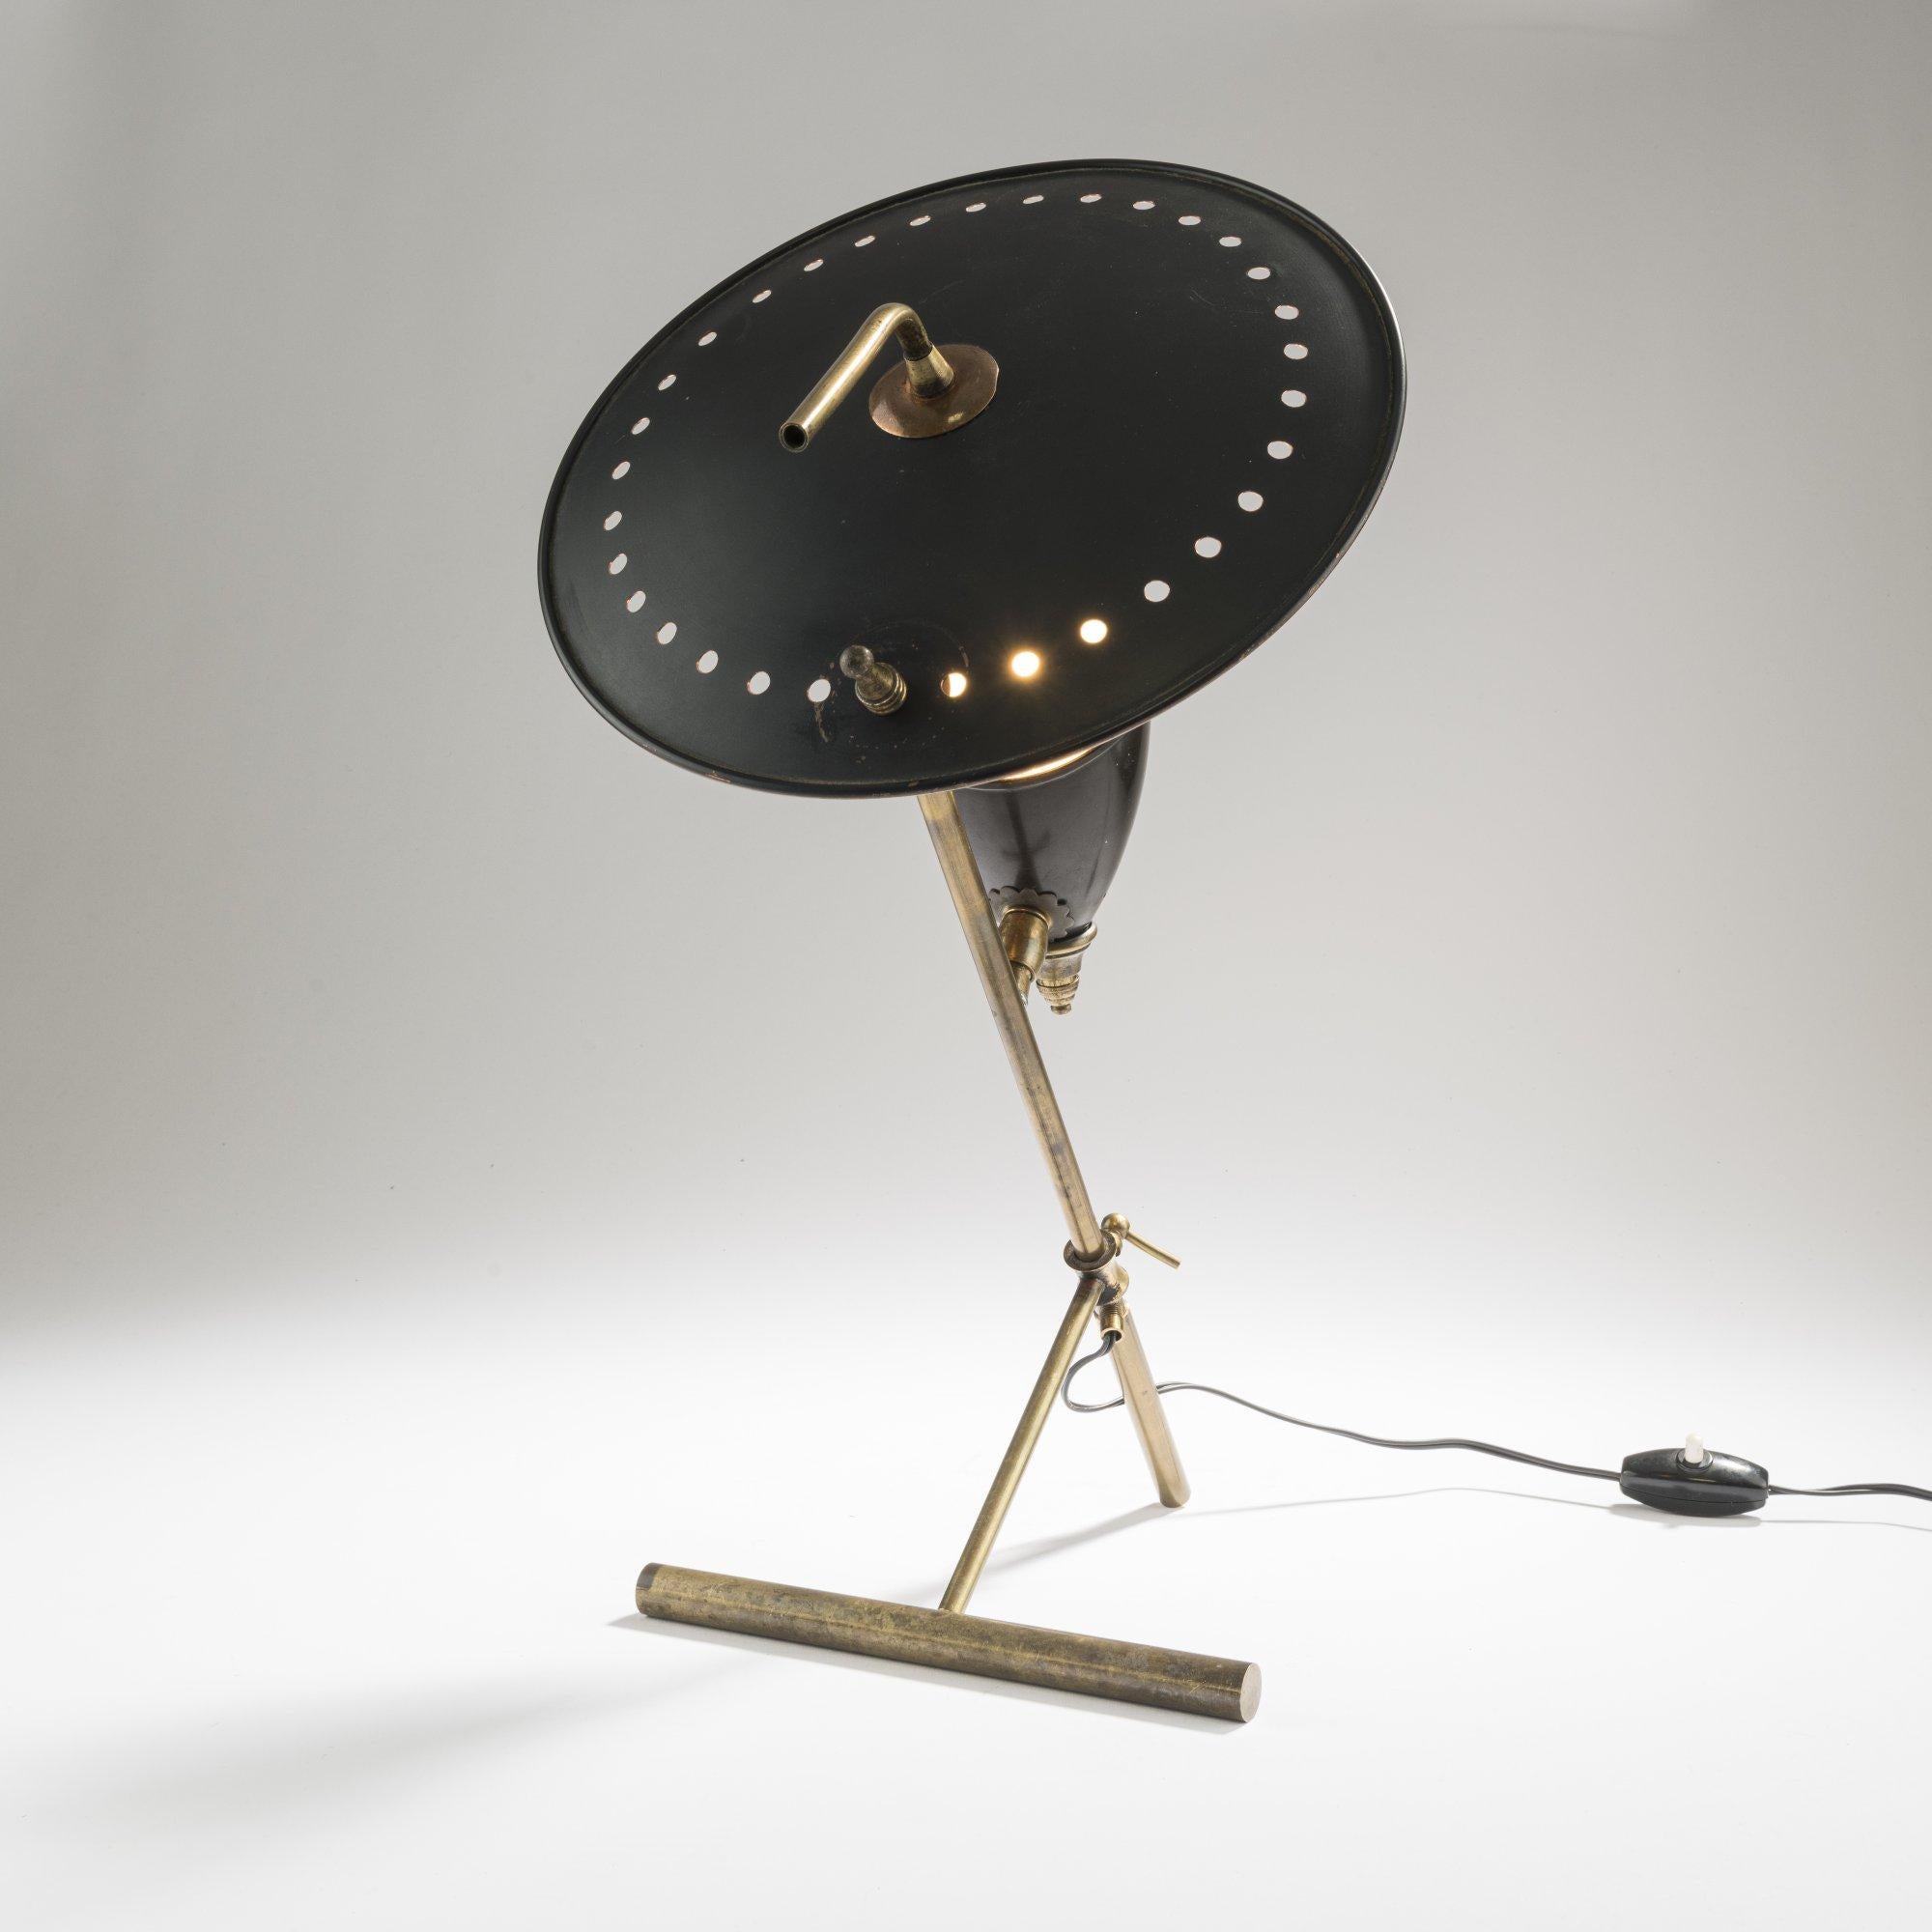 Table lamp, Italy 1950s. Brass, aluminum and sheet copper, perforated, black painted shade.